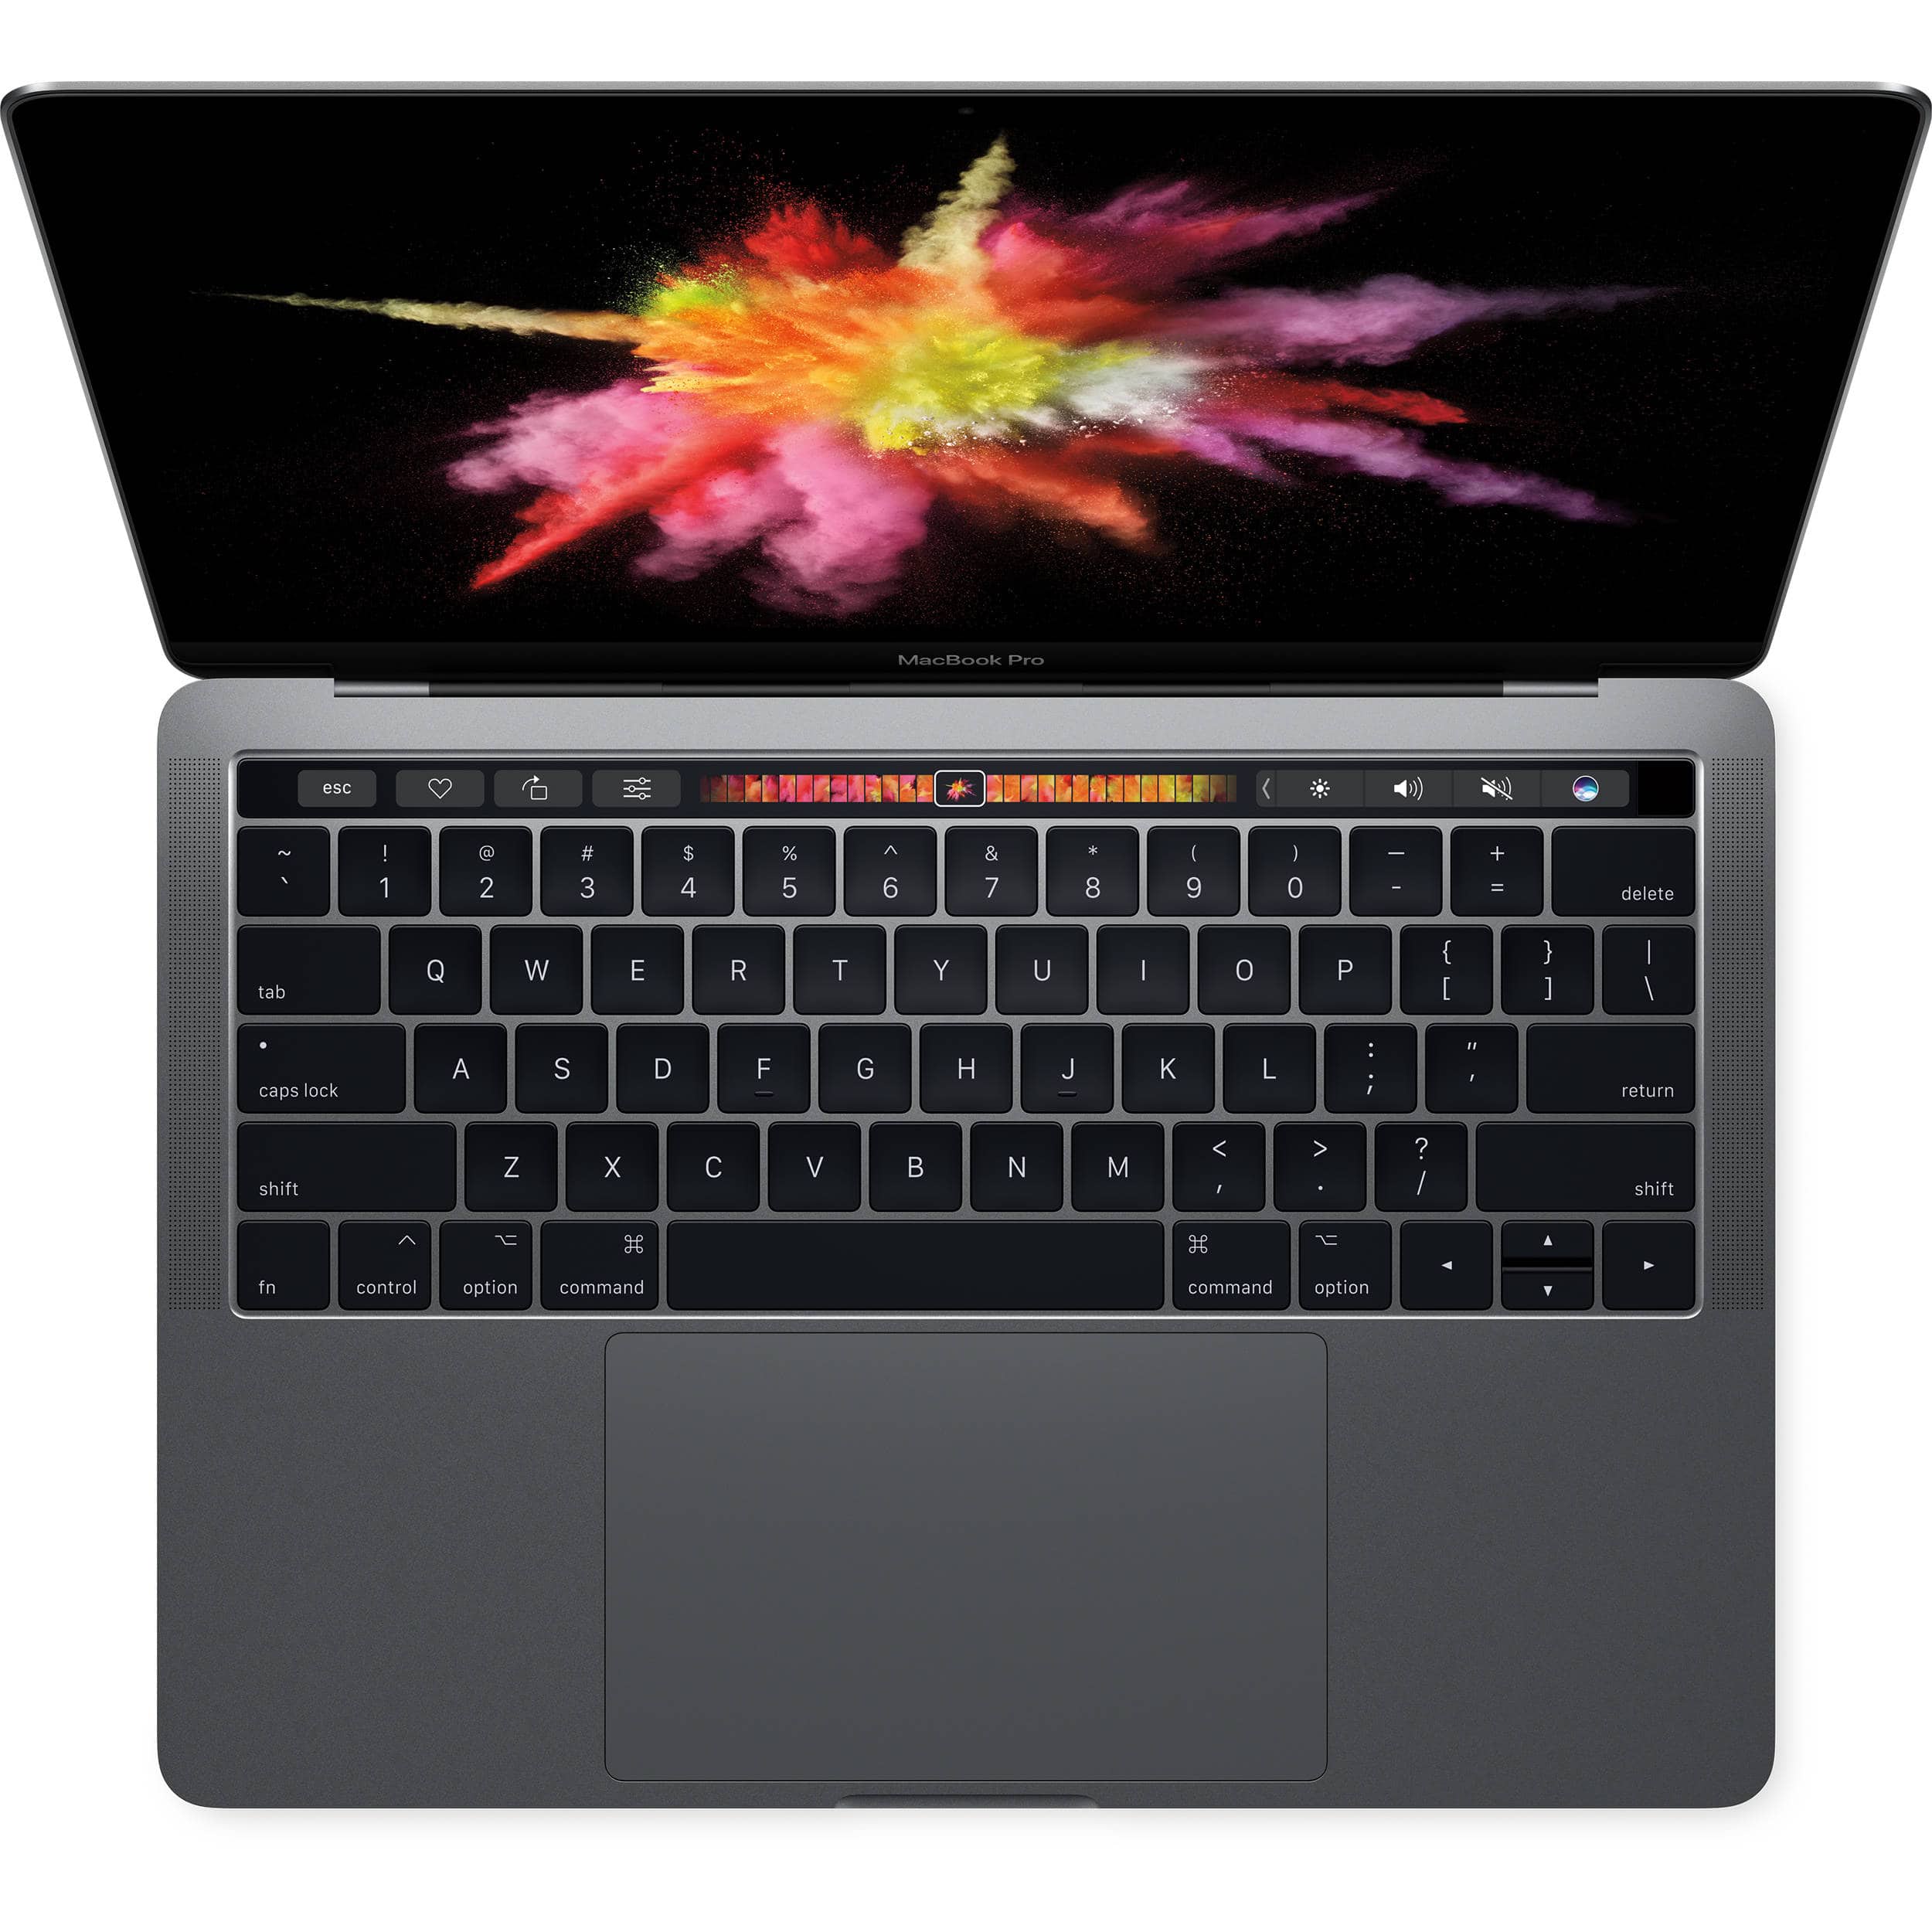 The MacBook Pro butterfly keyboard can prove ... problematic.